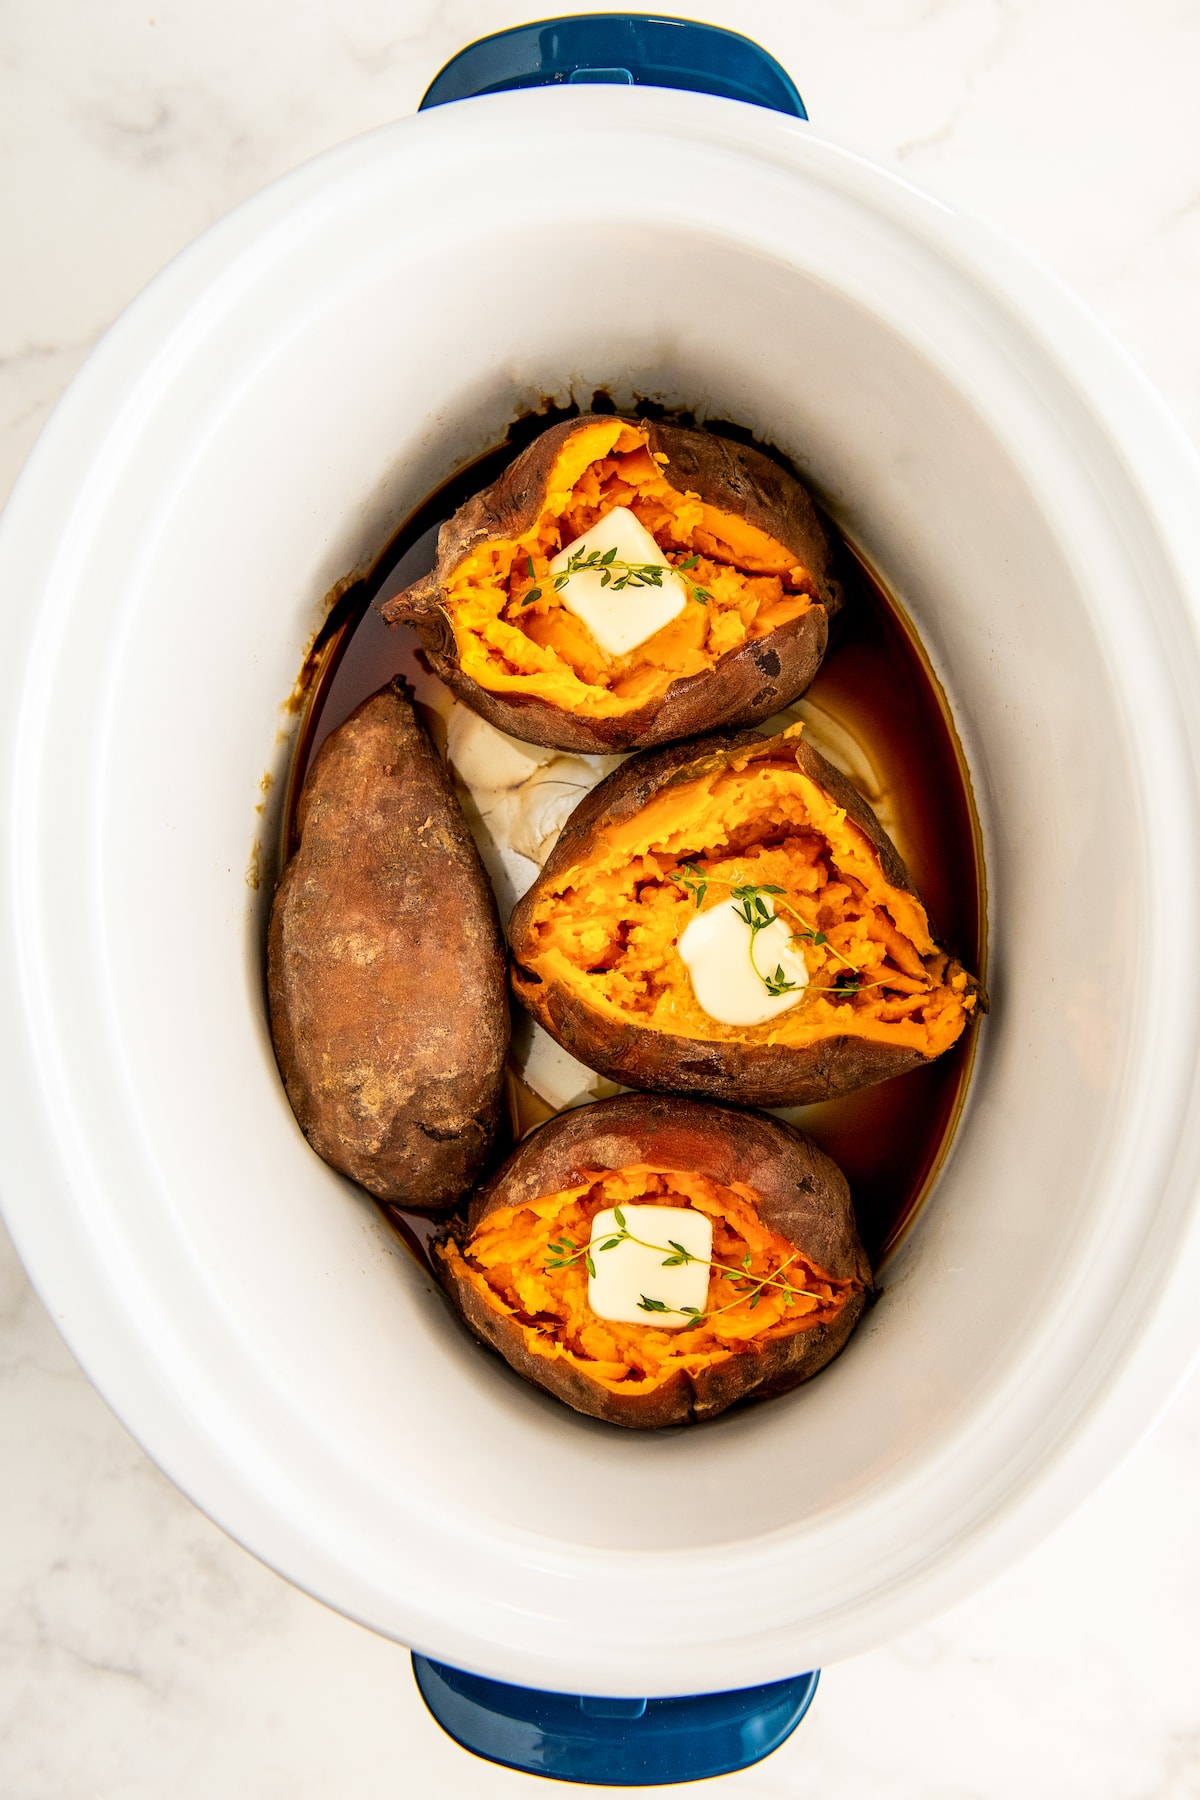 Slow cooker sweet potatoes cooked till tender, sliced open and filled with pads of butter. 